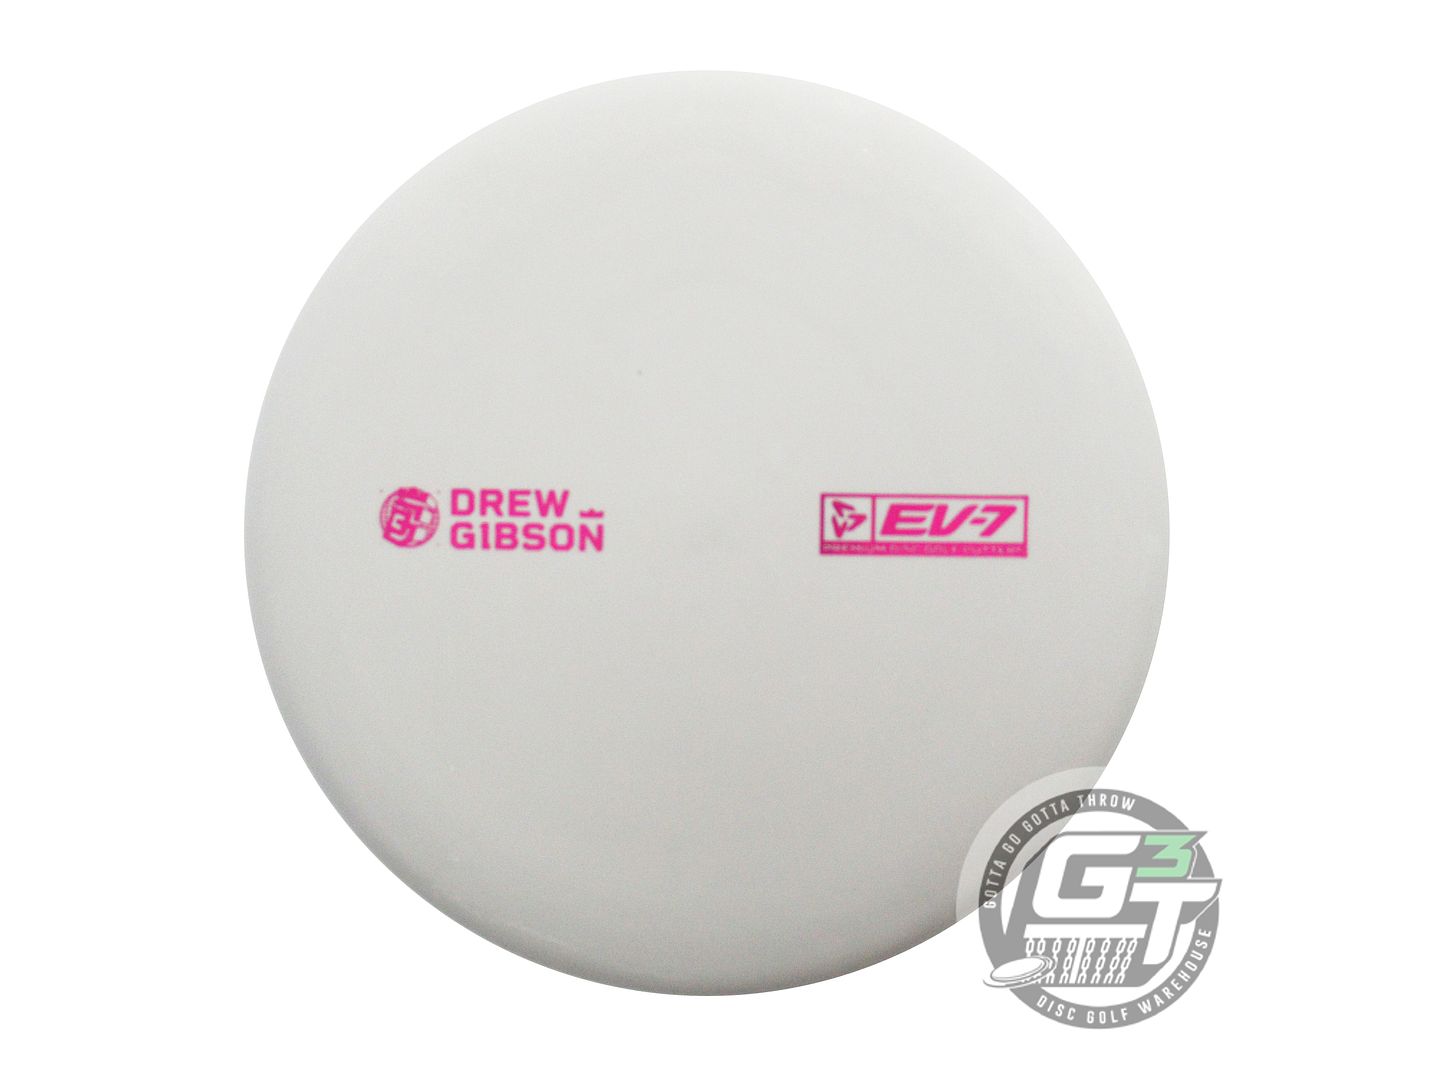 EV-7 Limited Edition 2022 Tour Series Drew Gibson OG Soft Penrose Putter Golf Disc (Individually Listed)